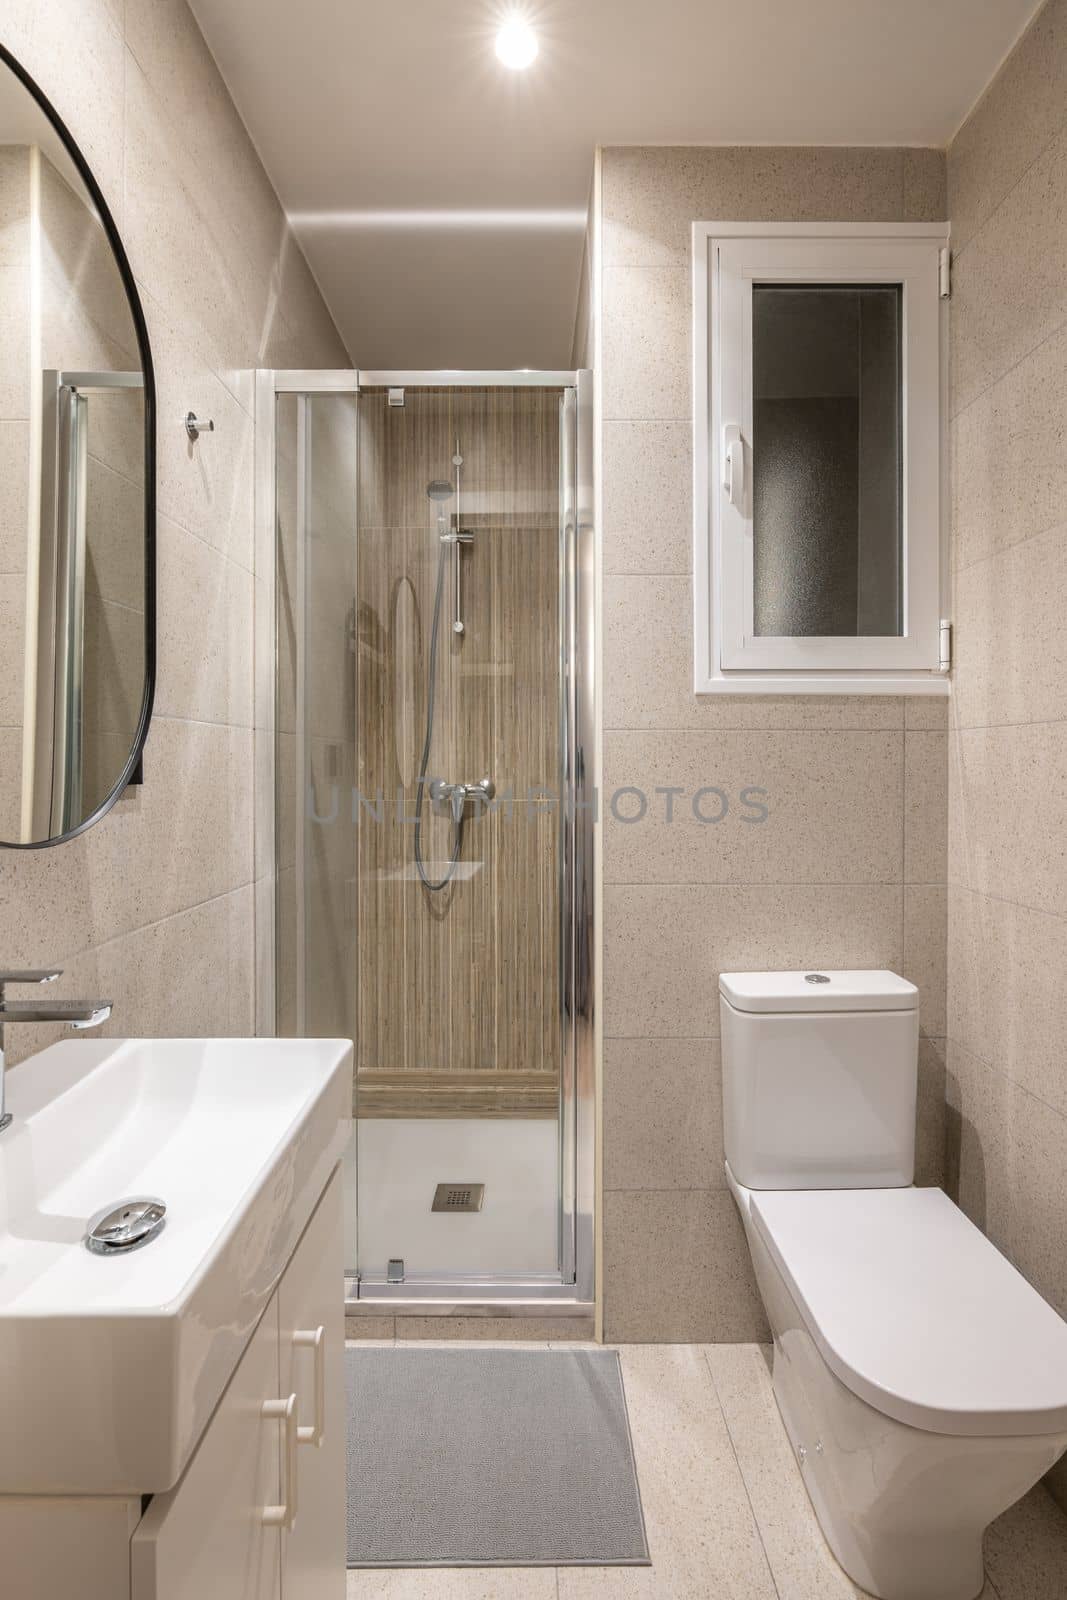 Compact bathroom with bright lighting from ceiling. Beige granite tiles on walls. White toilet bowl and sink on dressing table, shower area with transparent glass partition. Oval mirror on wall